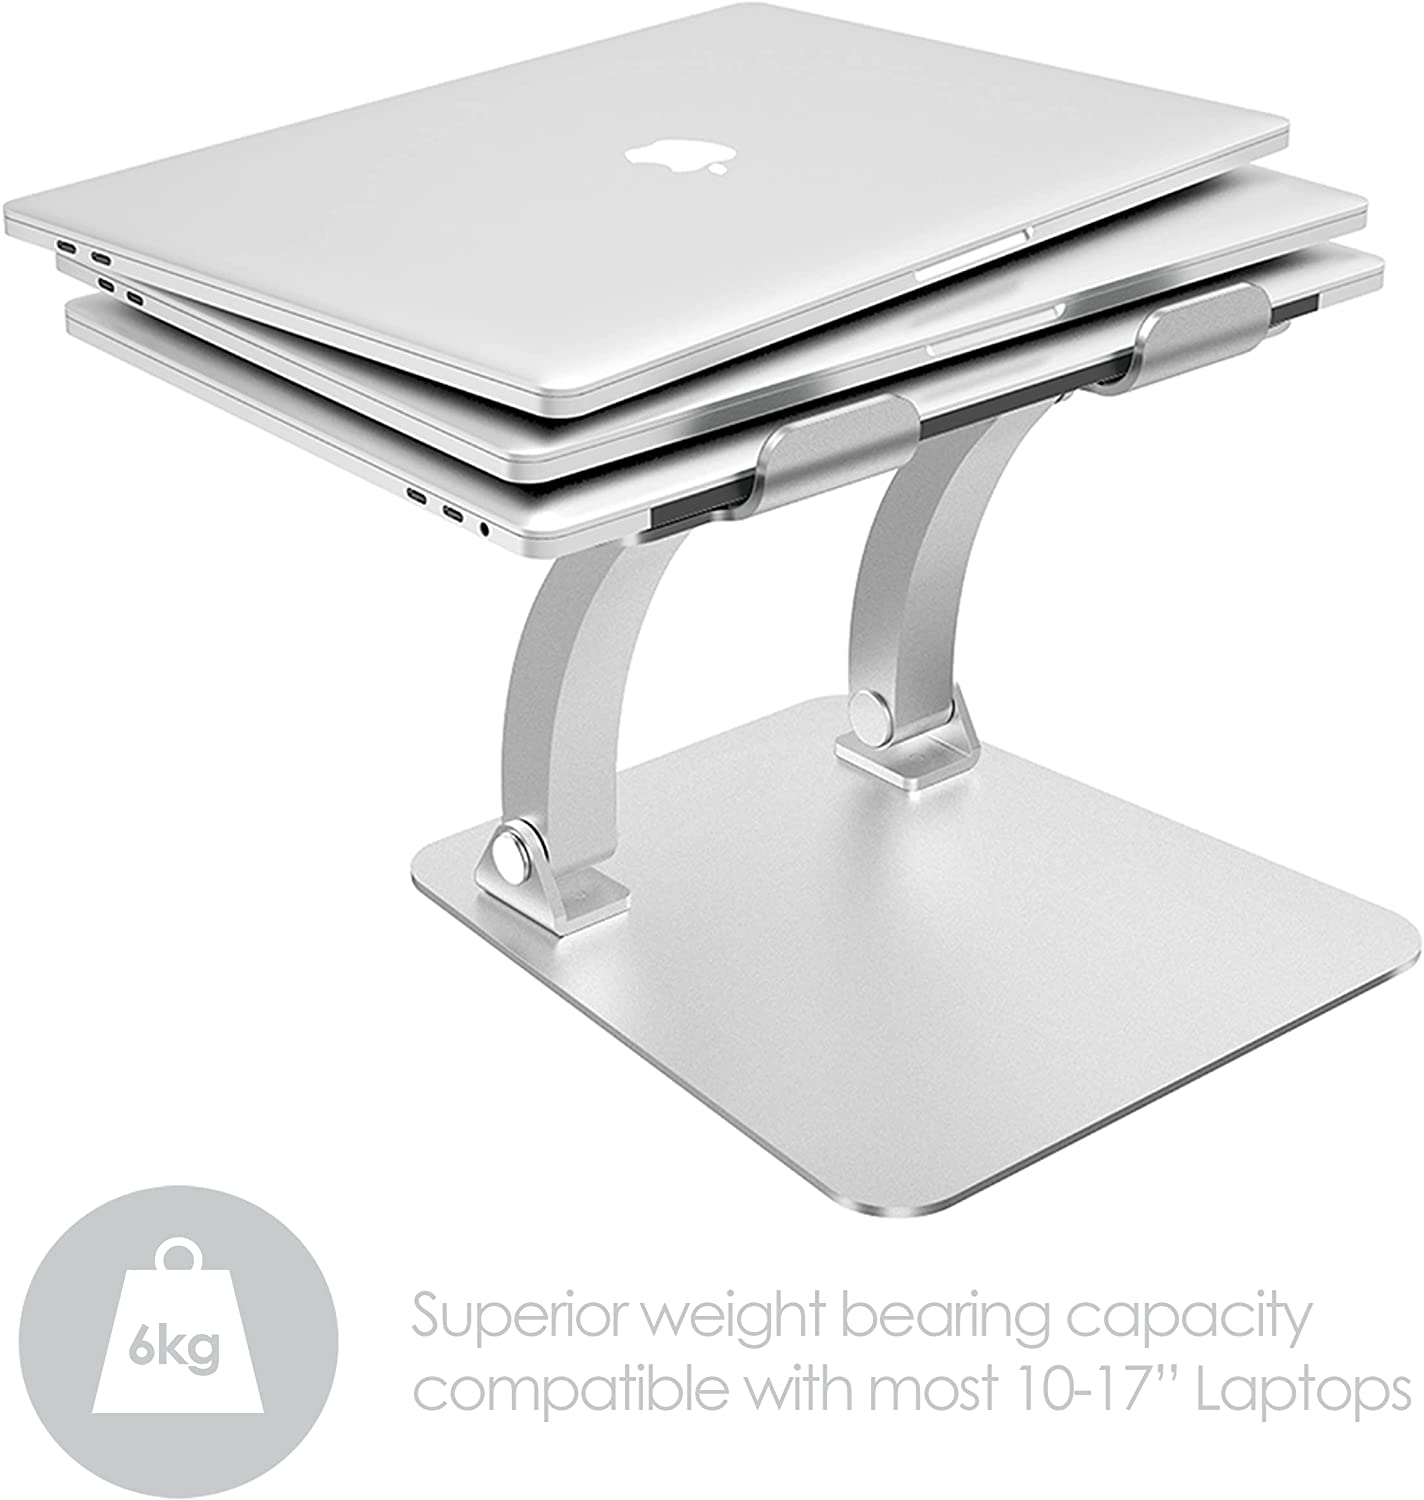 A well engineered laptop stand with three apple mac computers piled on it to show how strong it is.  An Icon shows a weight with "6kg" on it.  Text reads "Superior weight bearing capablity compatible with most 10-17 inch laptops 